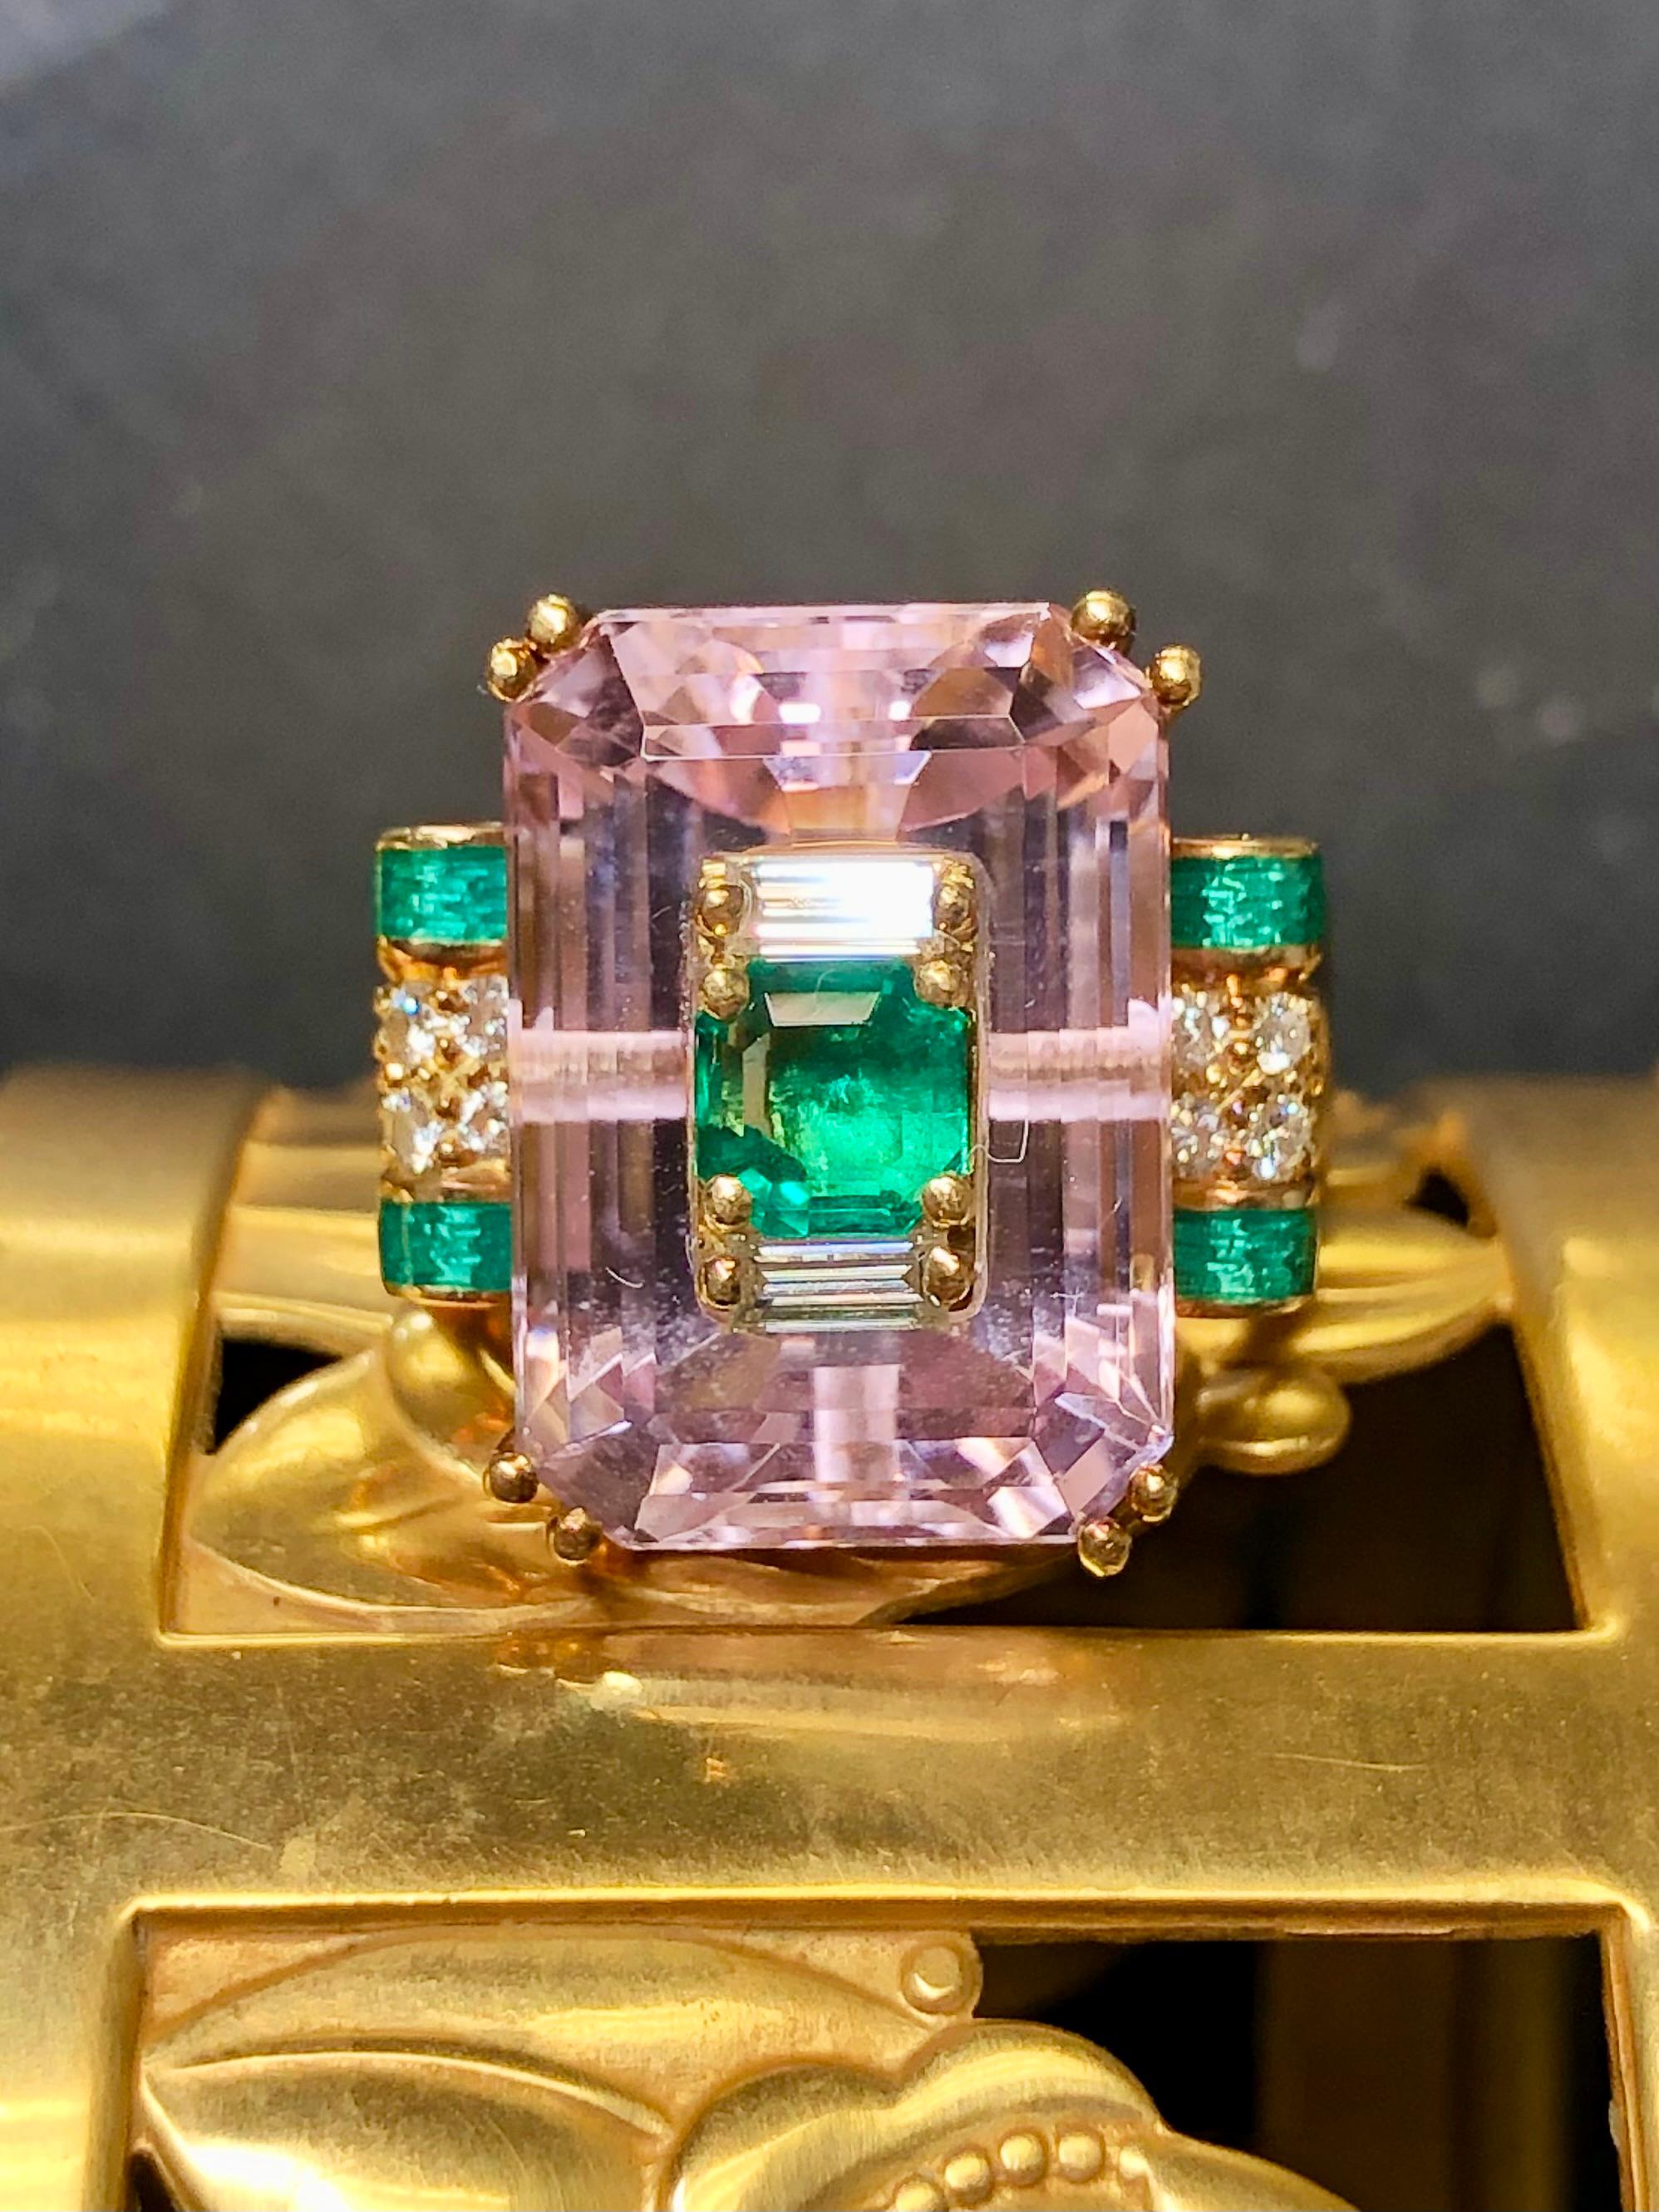 This ring is simply one of a kind and just FABULOUS… it had to have been a privately commissioned piece! It has been hand crafted in 18K yellow gold and prong set with an approximately 15.50ct natural kunzite which has been topped with a .65ct